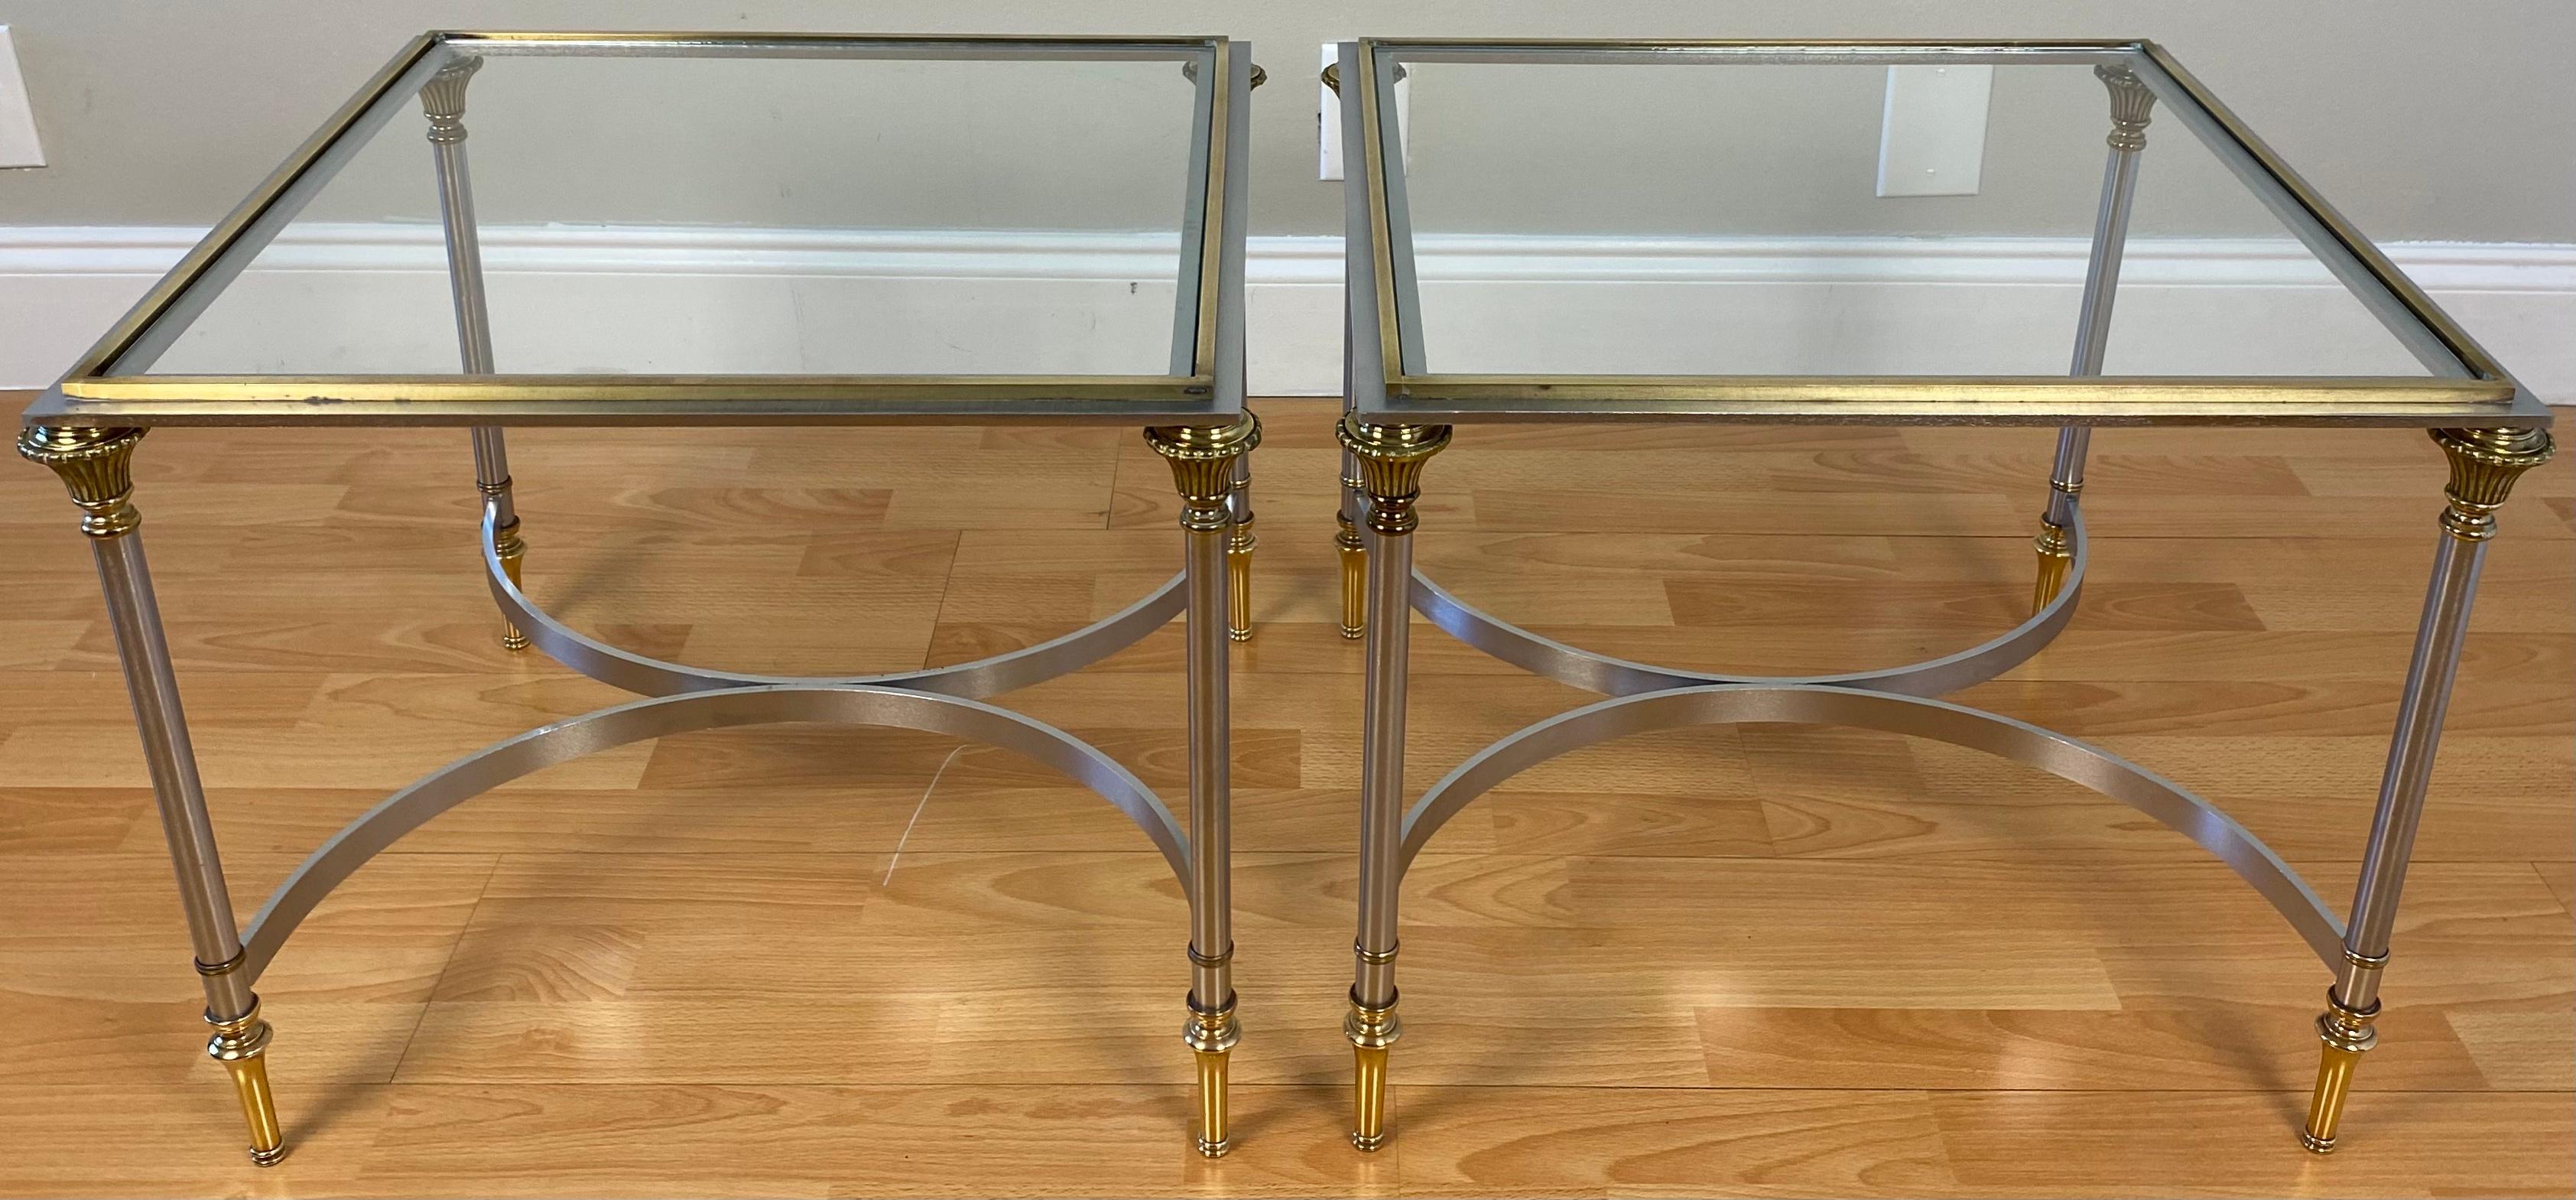 Pair of Italian Maison Jansen Style Brass and Brushed Steel End Tables 1